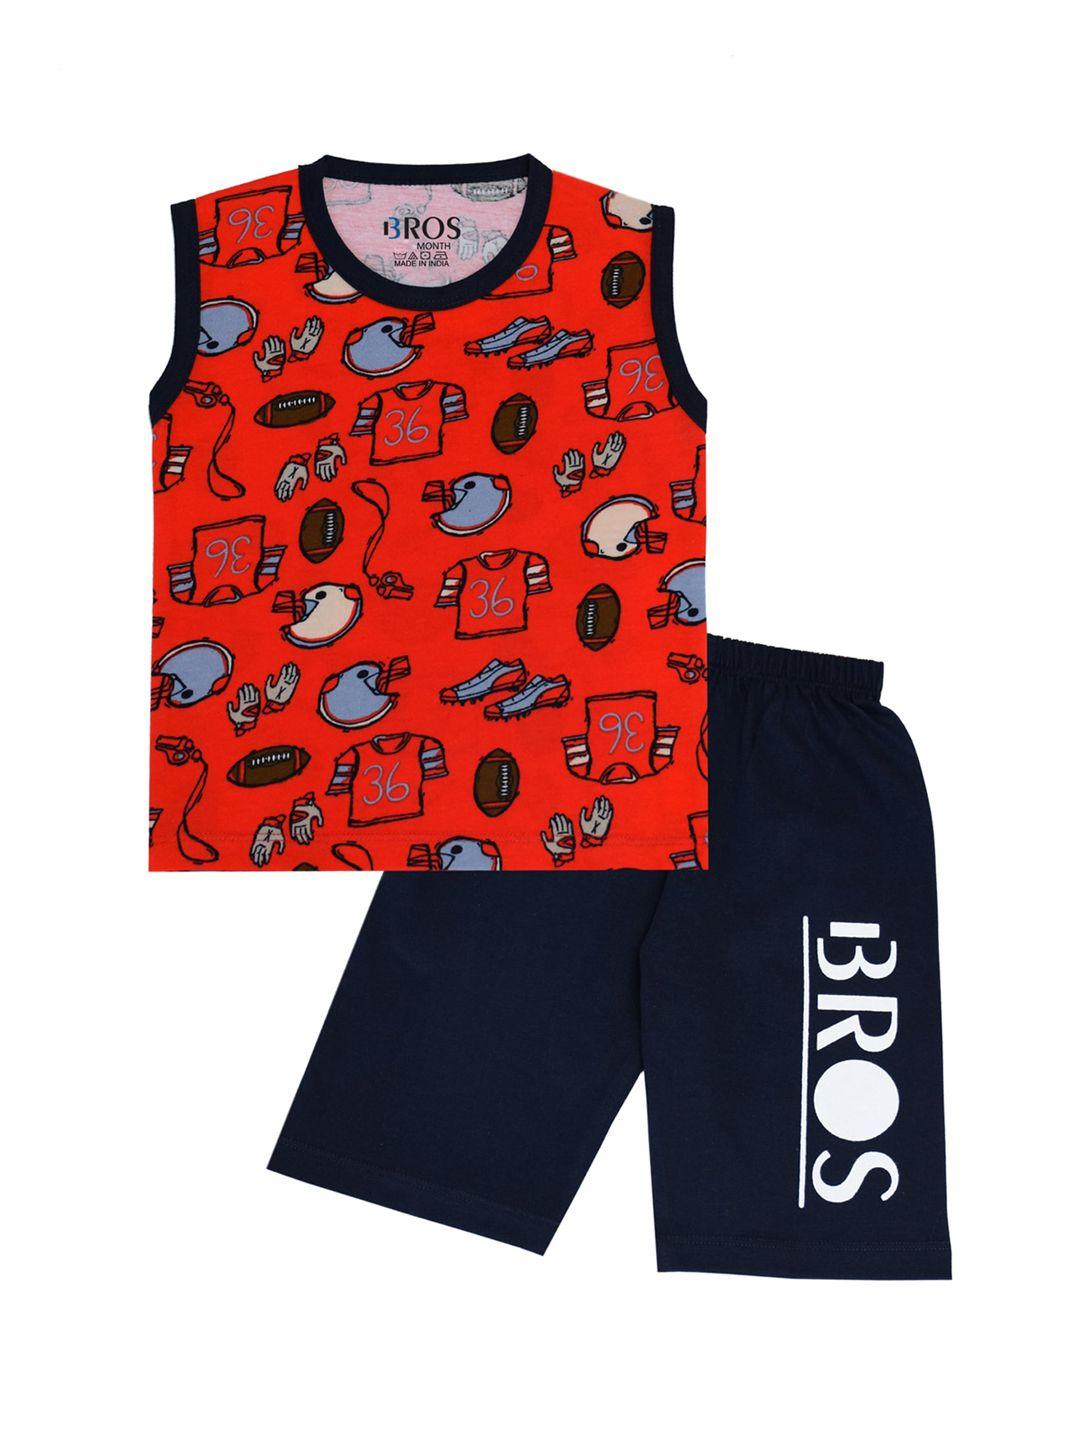 3bros-unisex-kids-red-&-black-printed-t-shirt-with-shorts